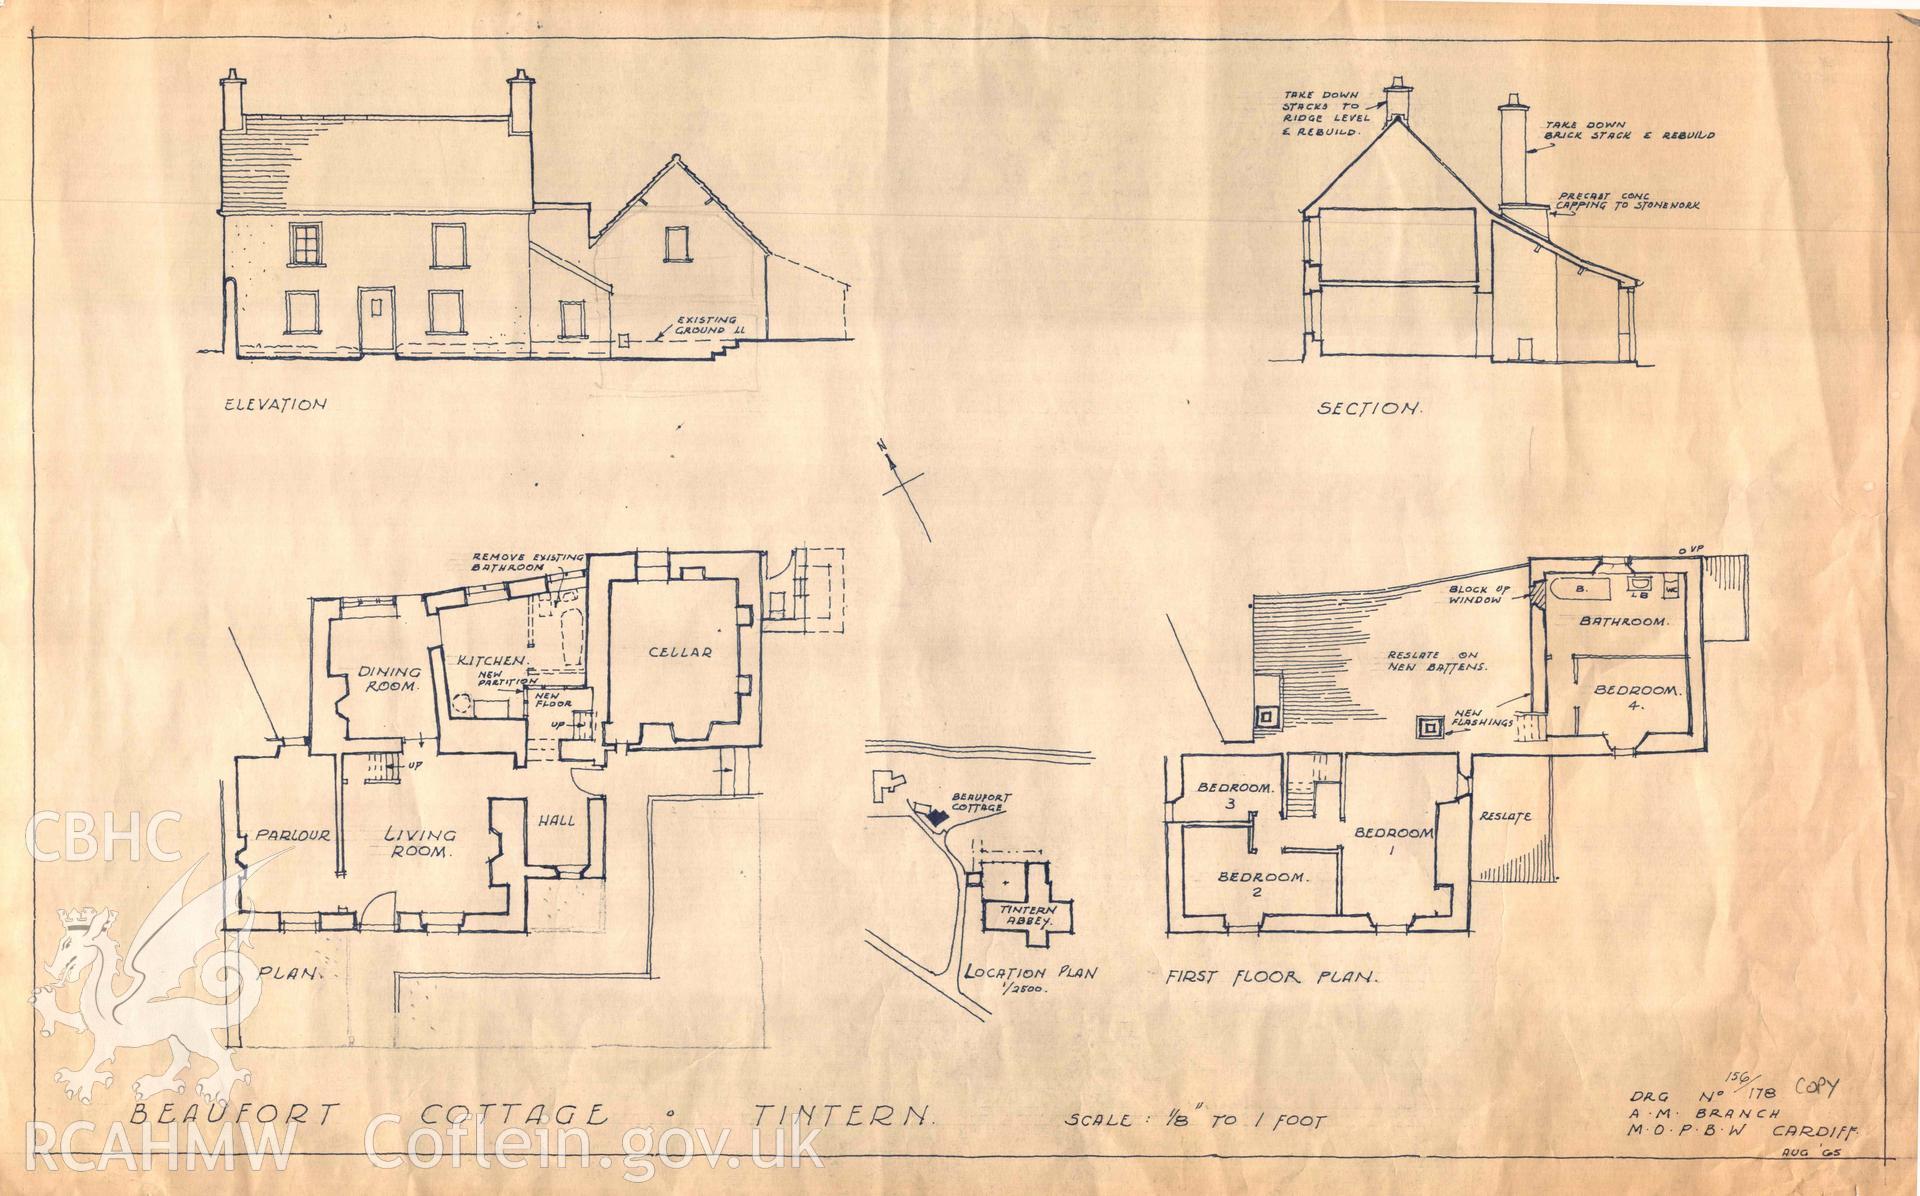 Cadw guardianship monument drawing, ground, 1st floor, section and elevation plan of Beaufort Cottage , Tintern Abbey.  Dated August 1965.